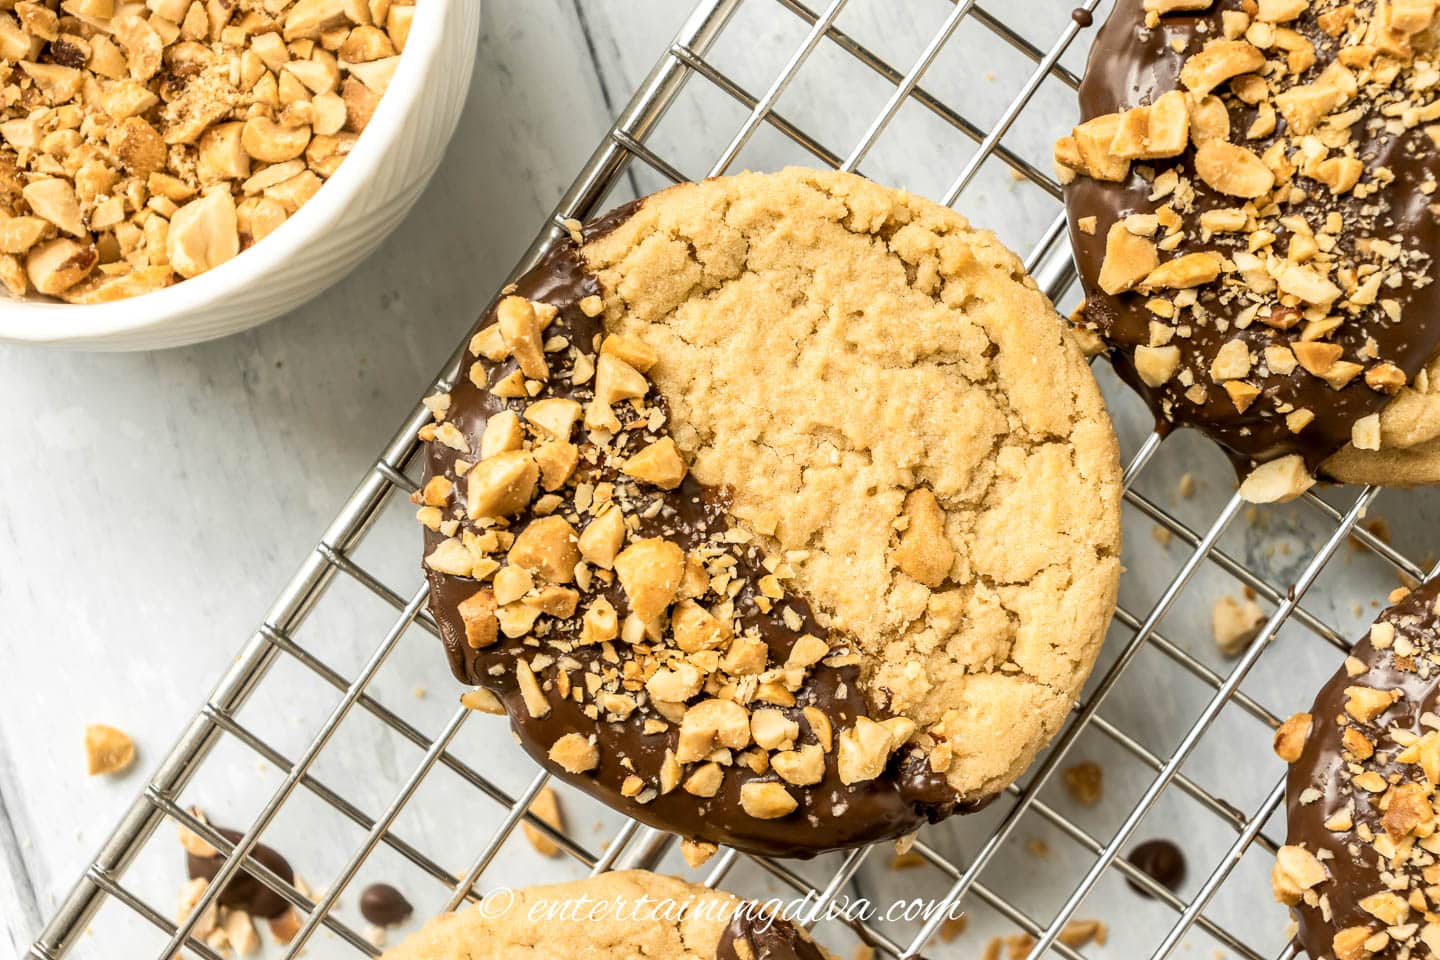 Chocolate-dipped peanut butter cookies topped with chopped peanuts on a cooling rack